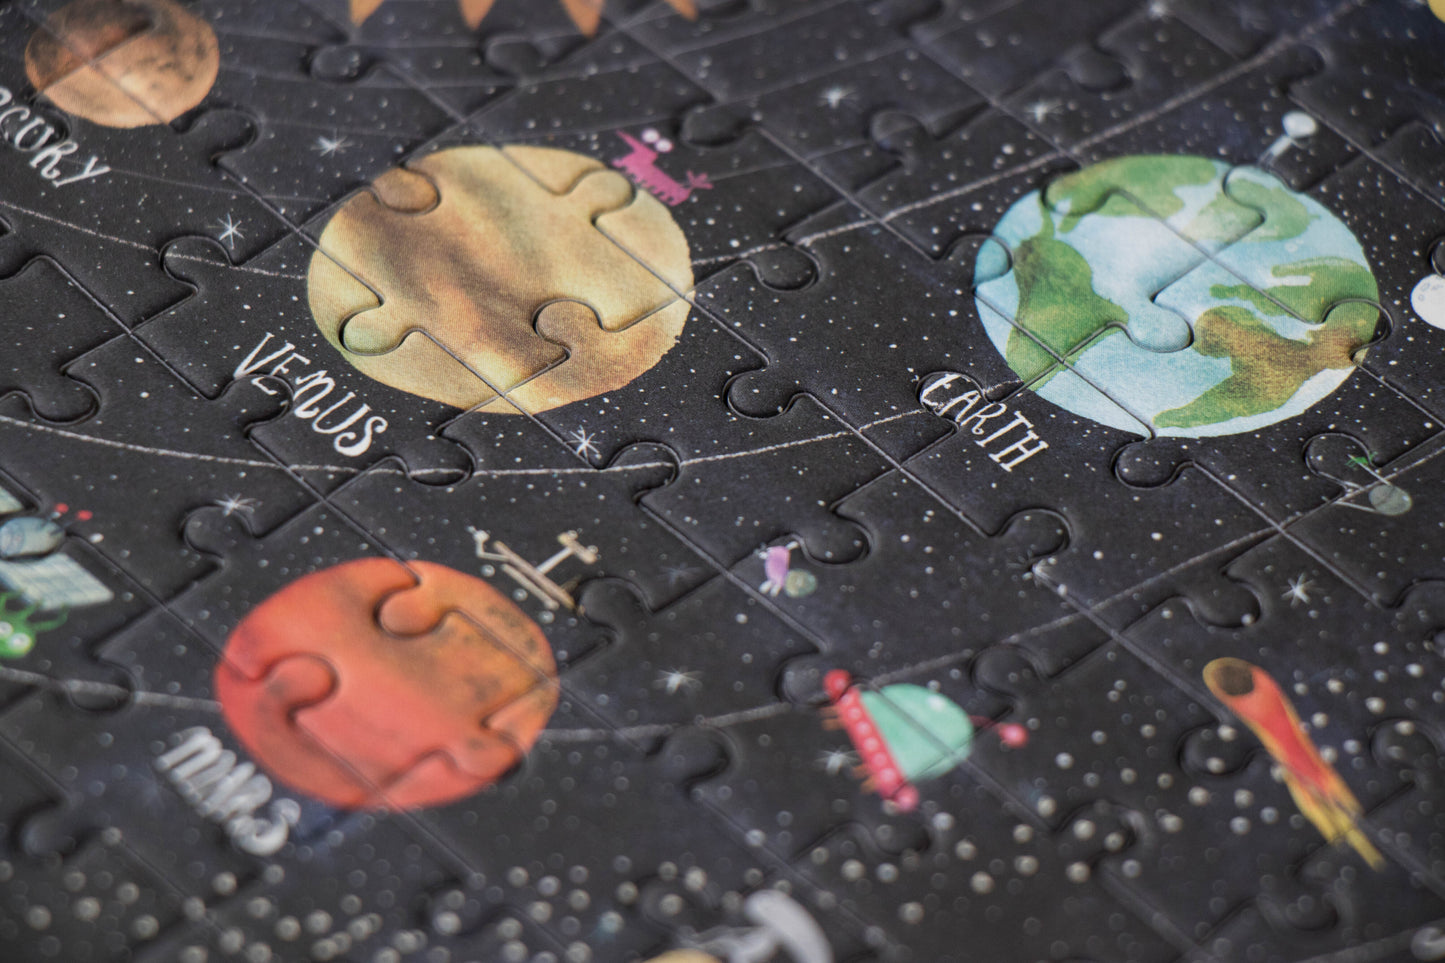 Pocket Puzzle Discover the planets